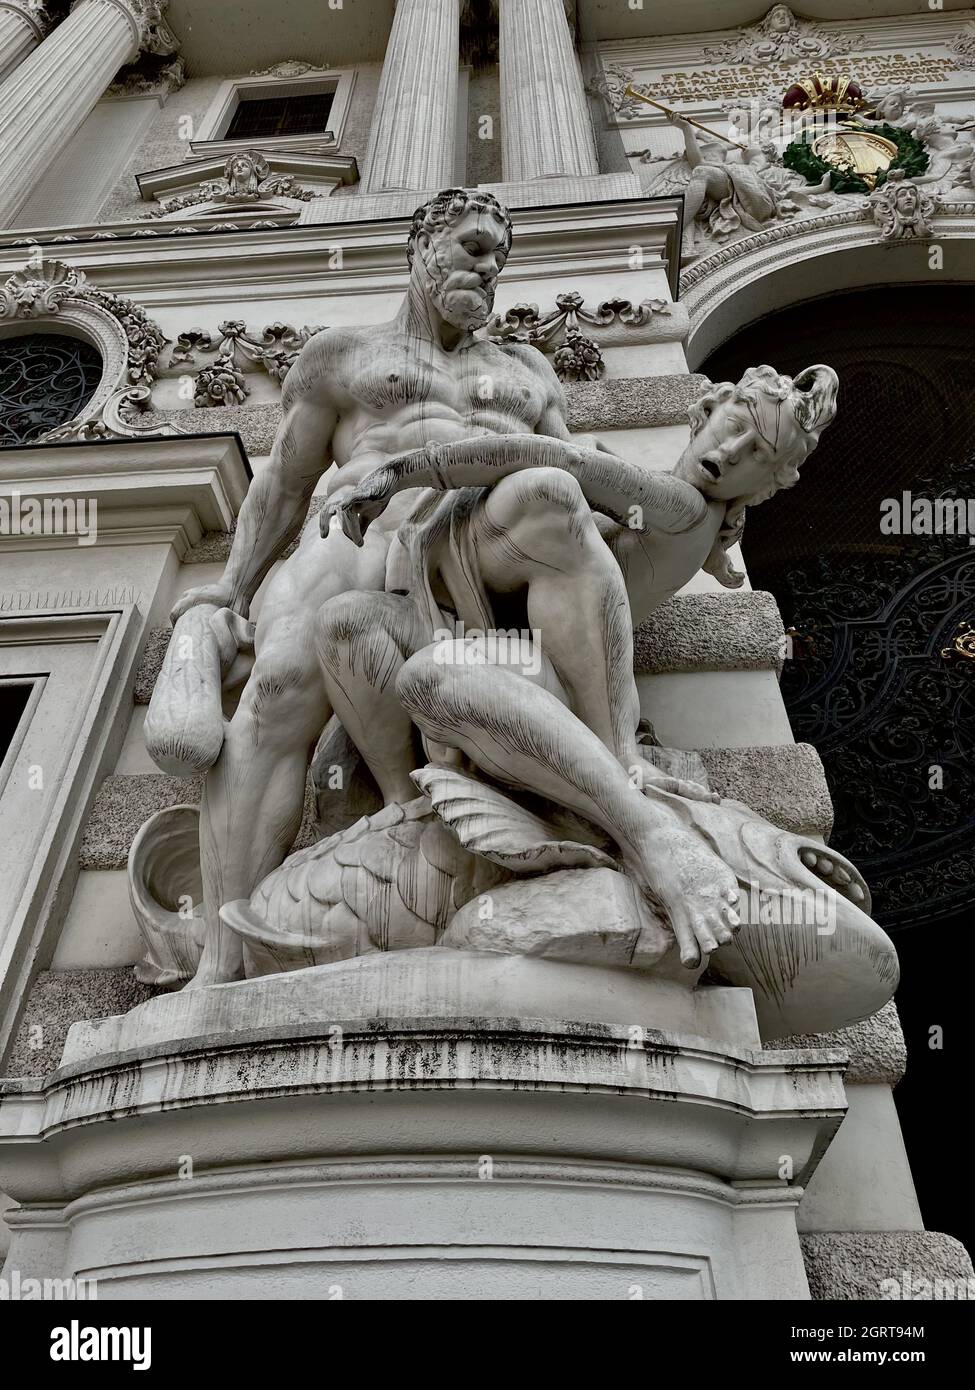 The sculpture of Hercules capturing a foe at the Hofburg Imperial Palace, Vienna, Austria Stock Photo